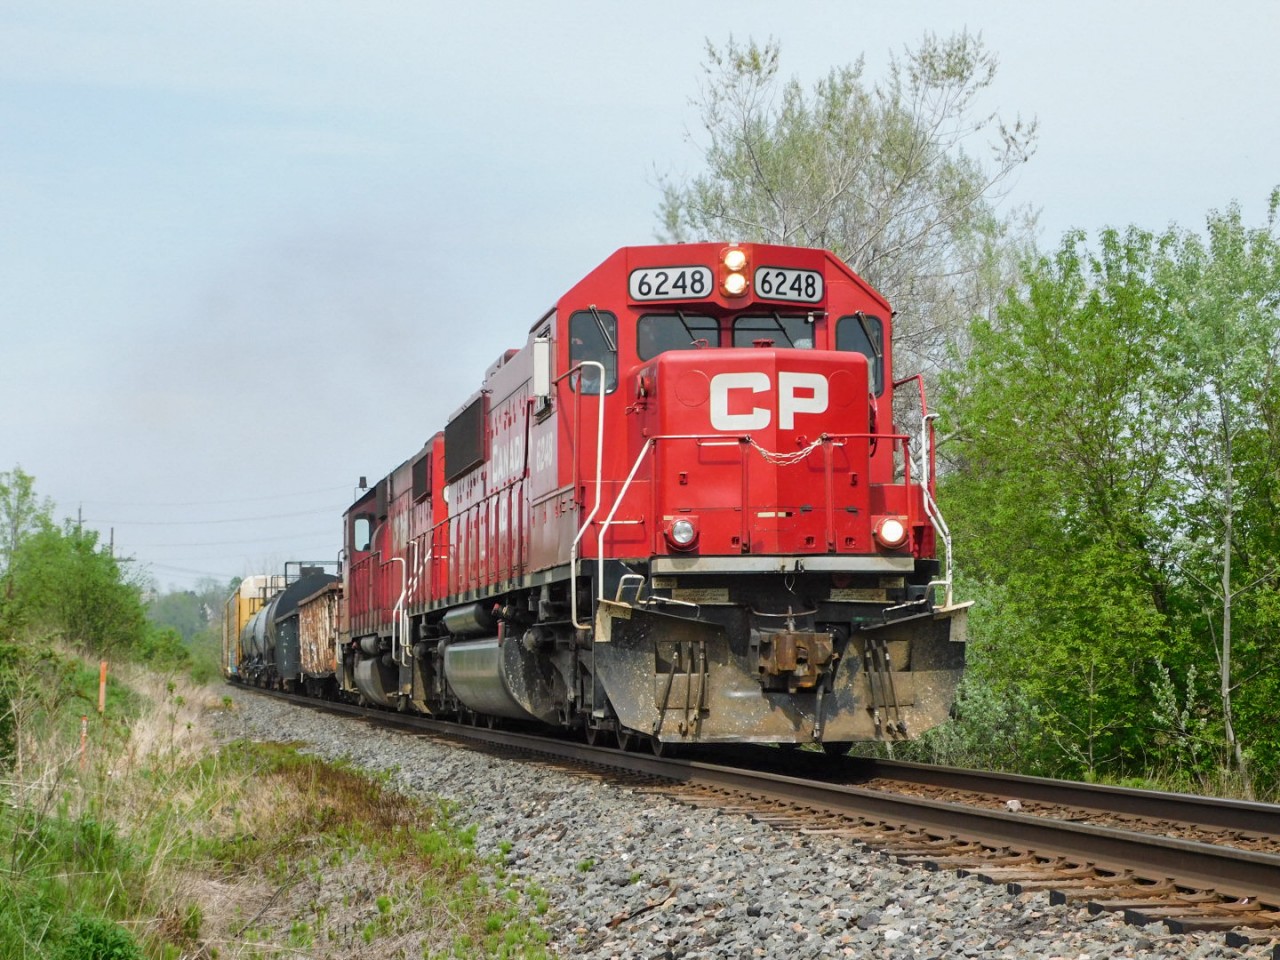 Once in a lifetime catch on CP T10. Normally a single geep with a few tank cars, this time with a beautiful SD60 and a bunch of autoracks Being pulled out of storage. Awesome ex soo lash up.